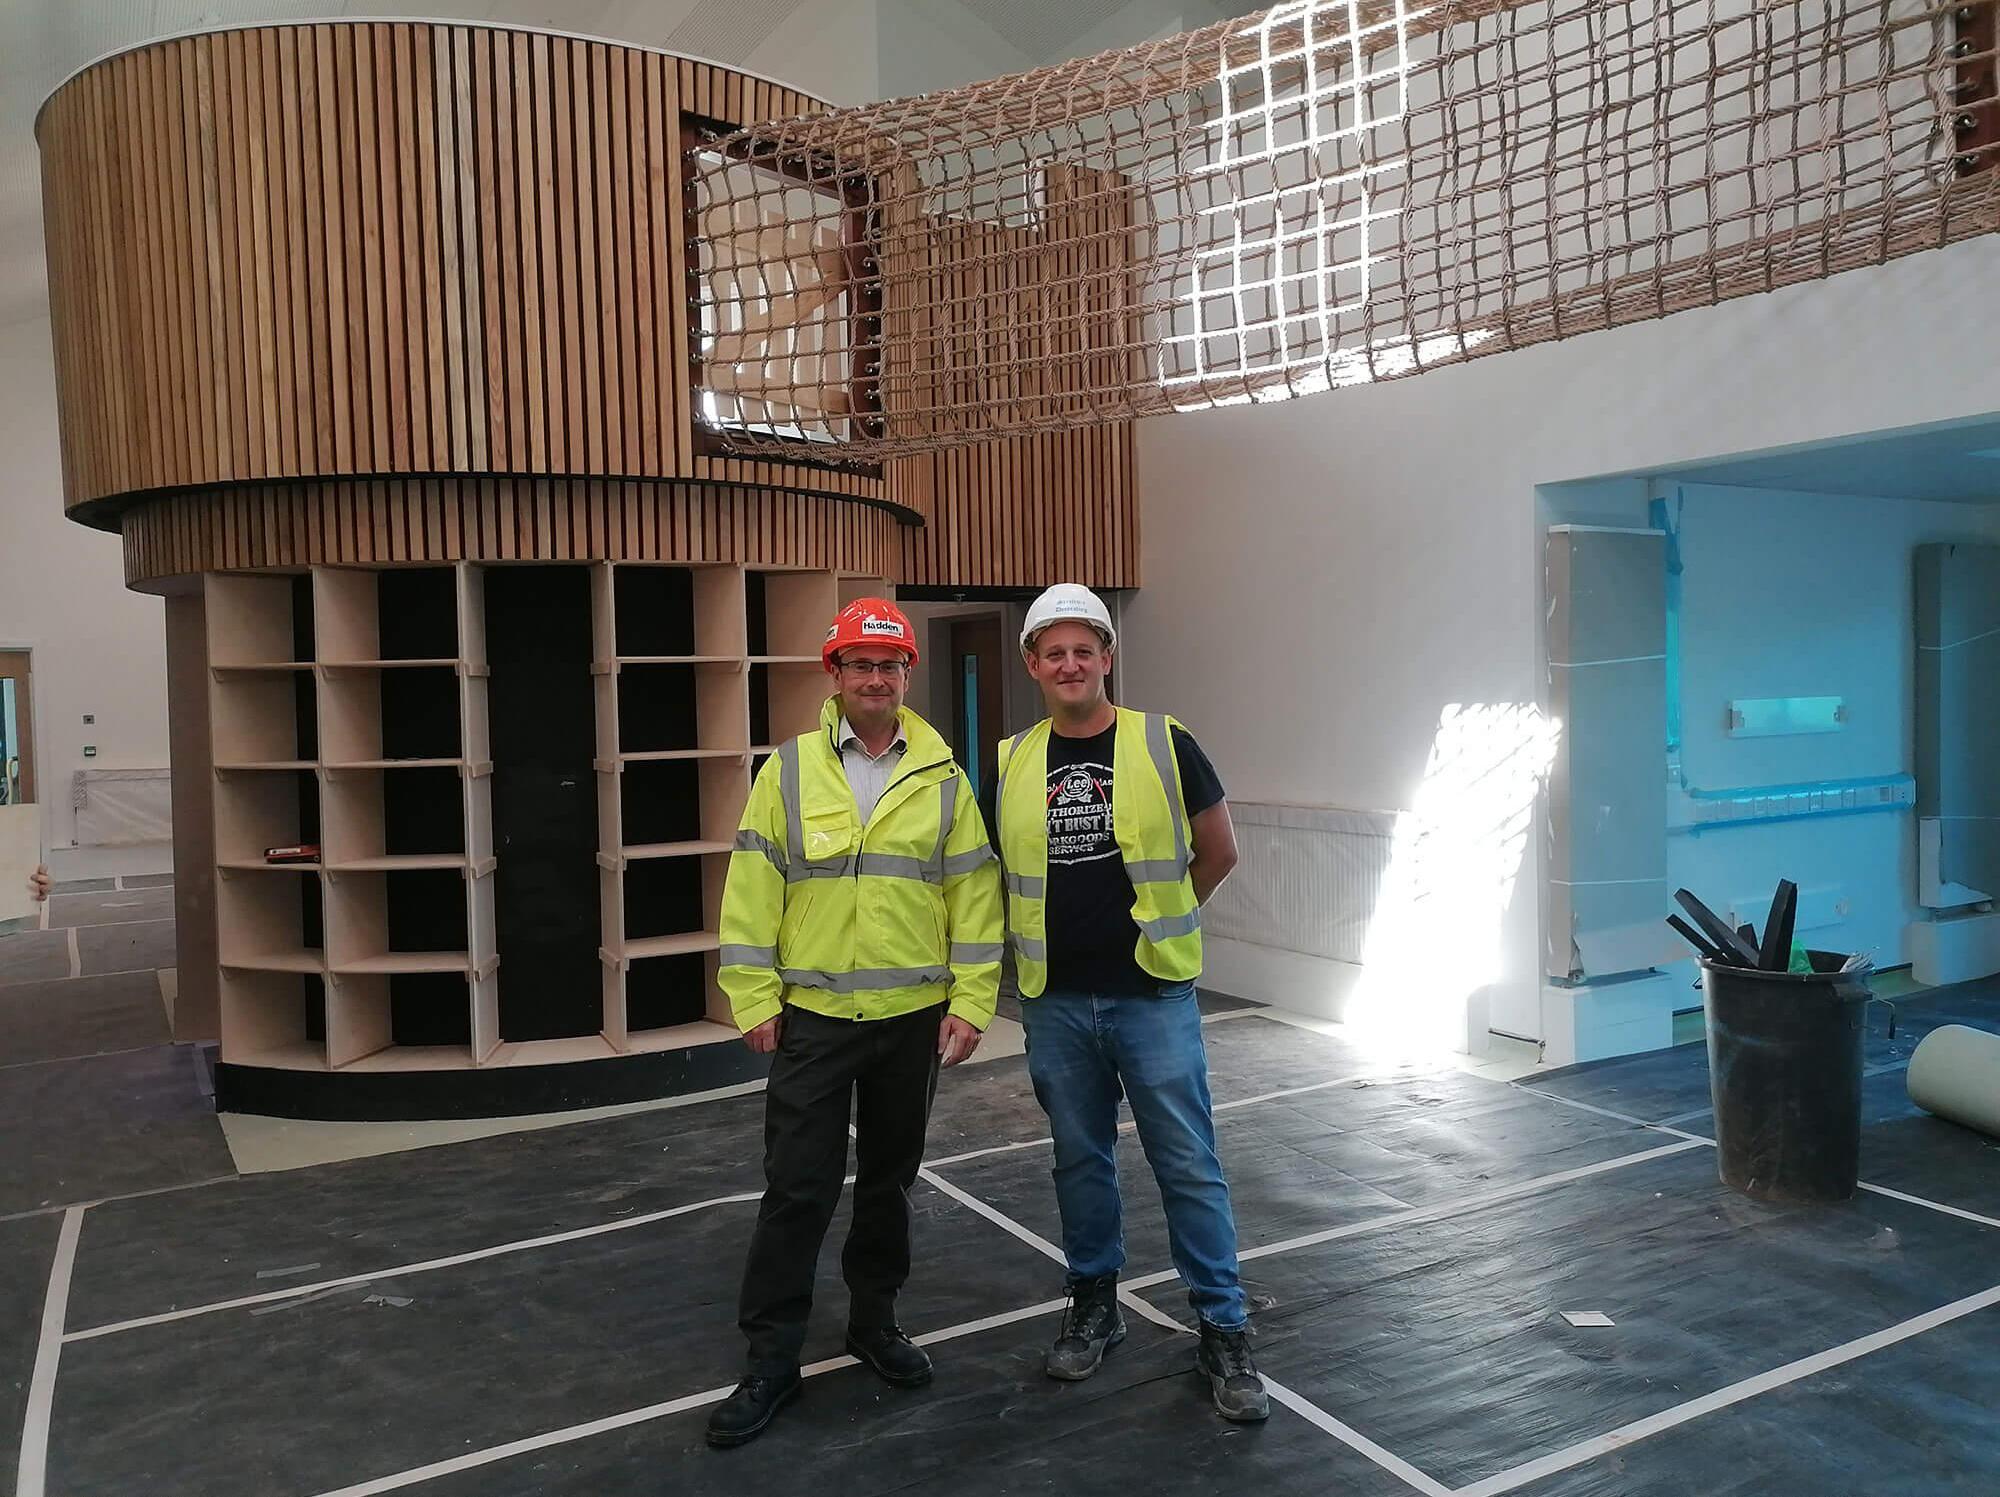 Chris Collins of Spectrum Decorating Ltd with Gordon Nelson for a site visit.